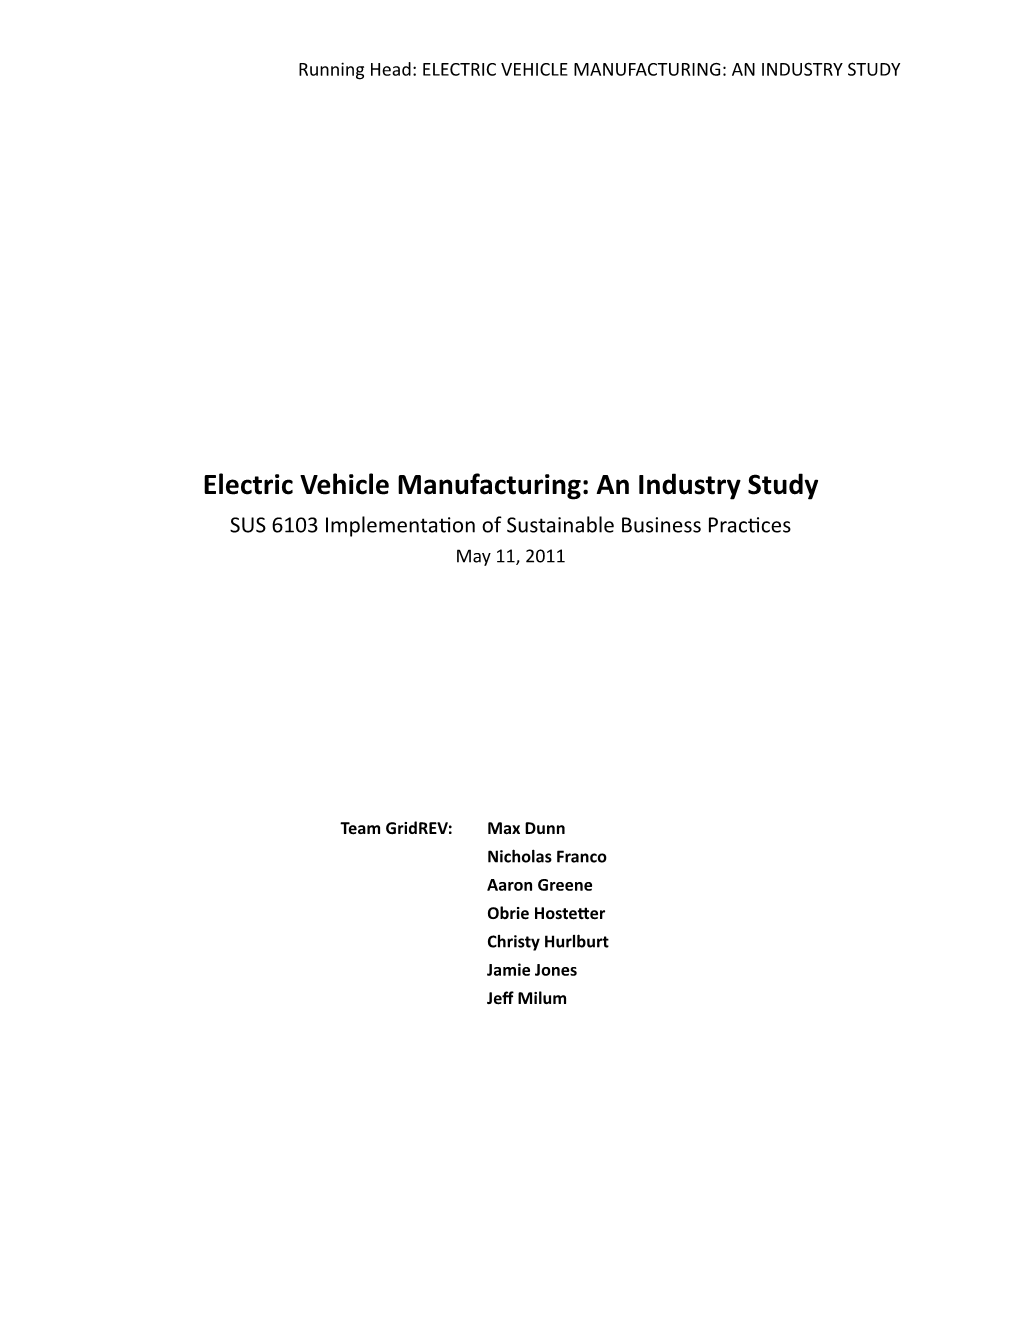 Electric Vehicle Manufacturing: an Industry Study